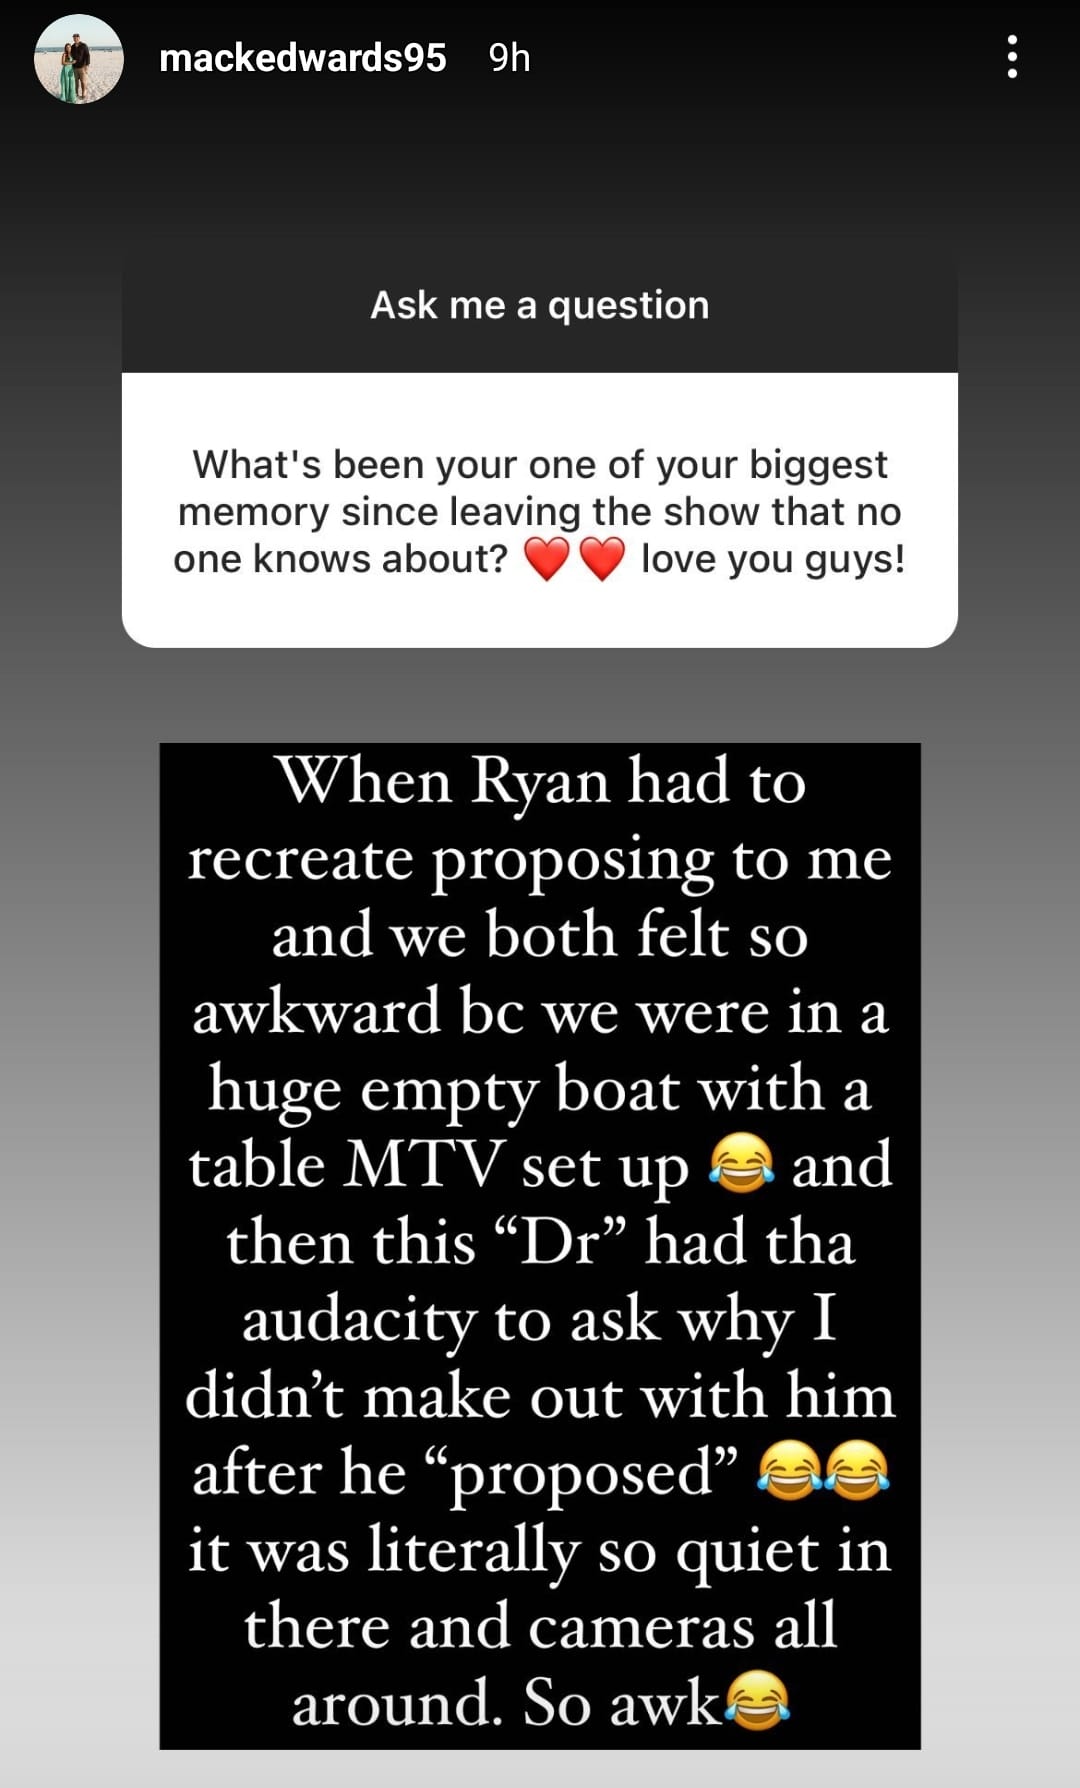 mackenzie edwards shared a memory from filming for teen mom OG on IG stories